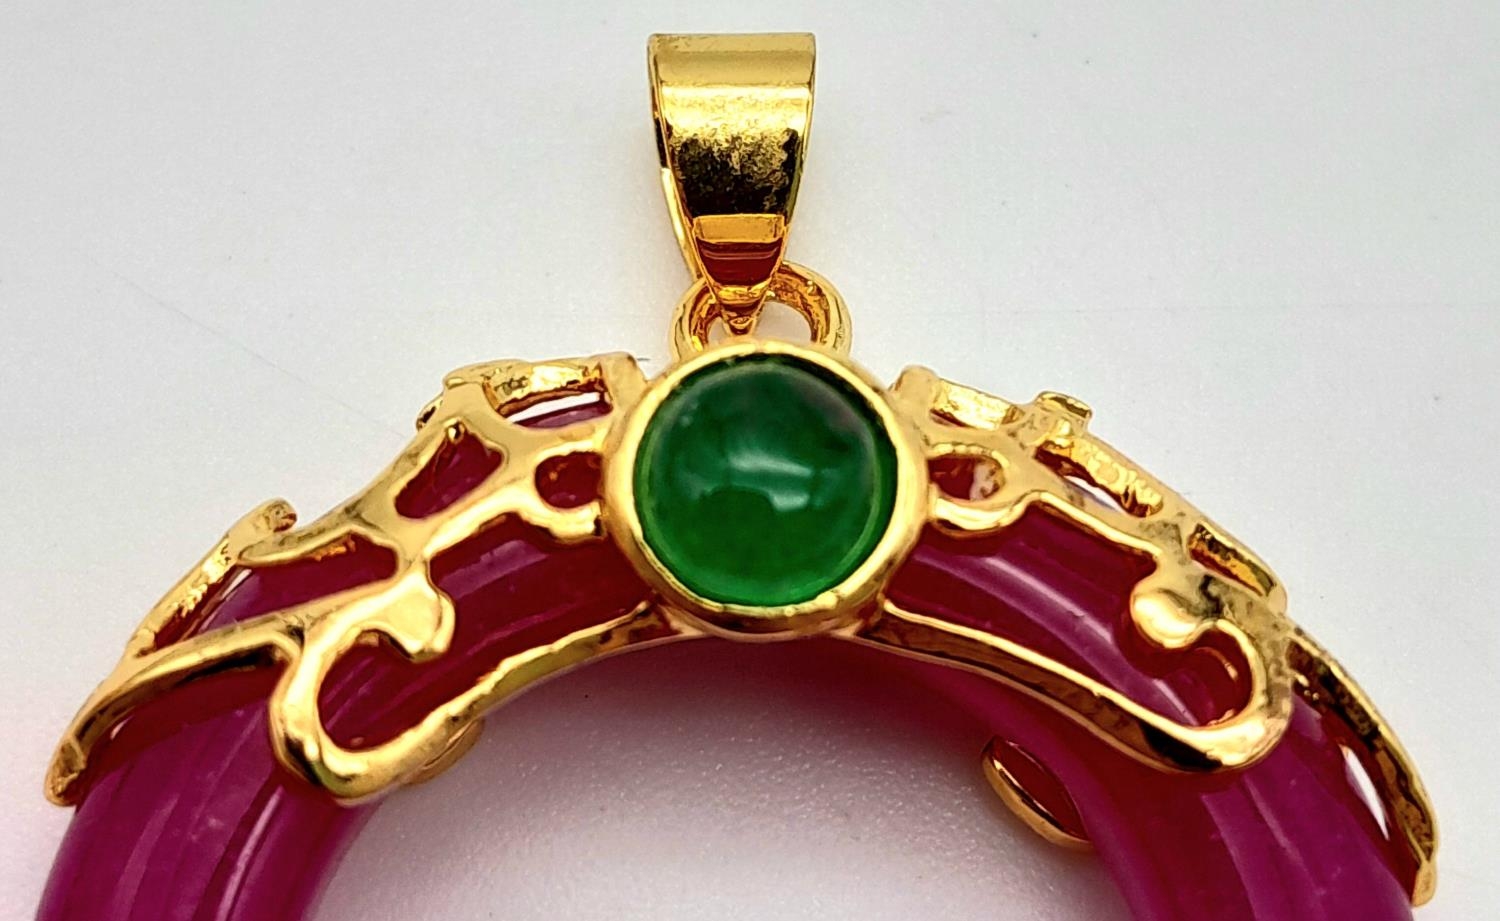 A Magenta Jade Pendant on Gilded Backing. 4cm length, 3cm diameter, 6.79g total weight. - Image 3 of 4